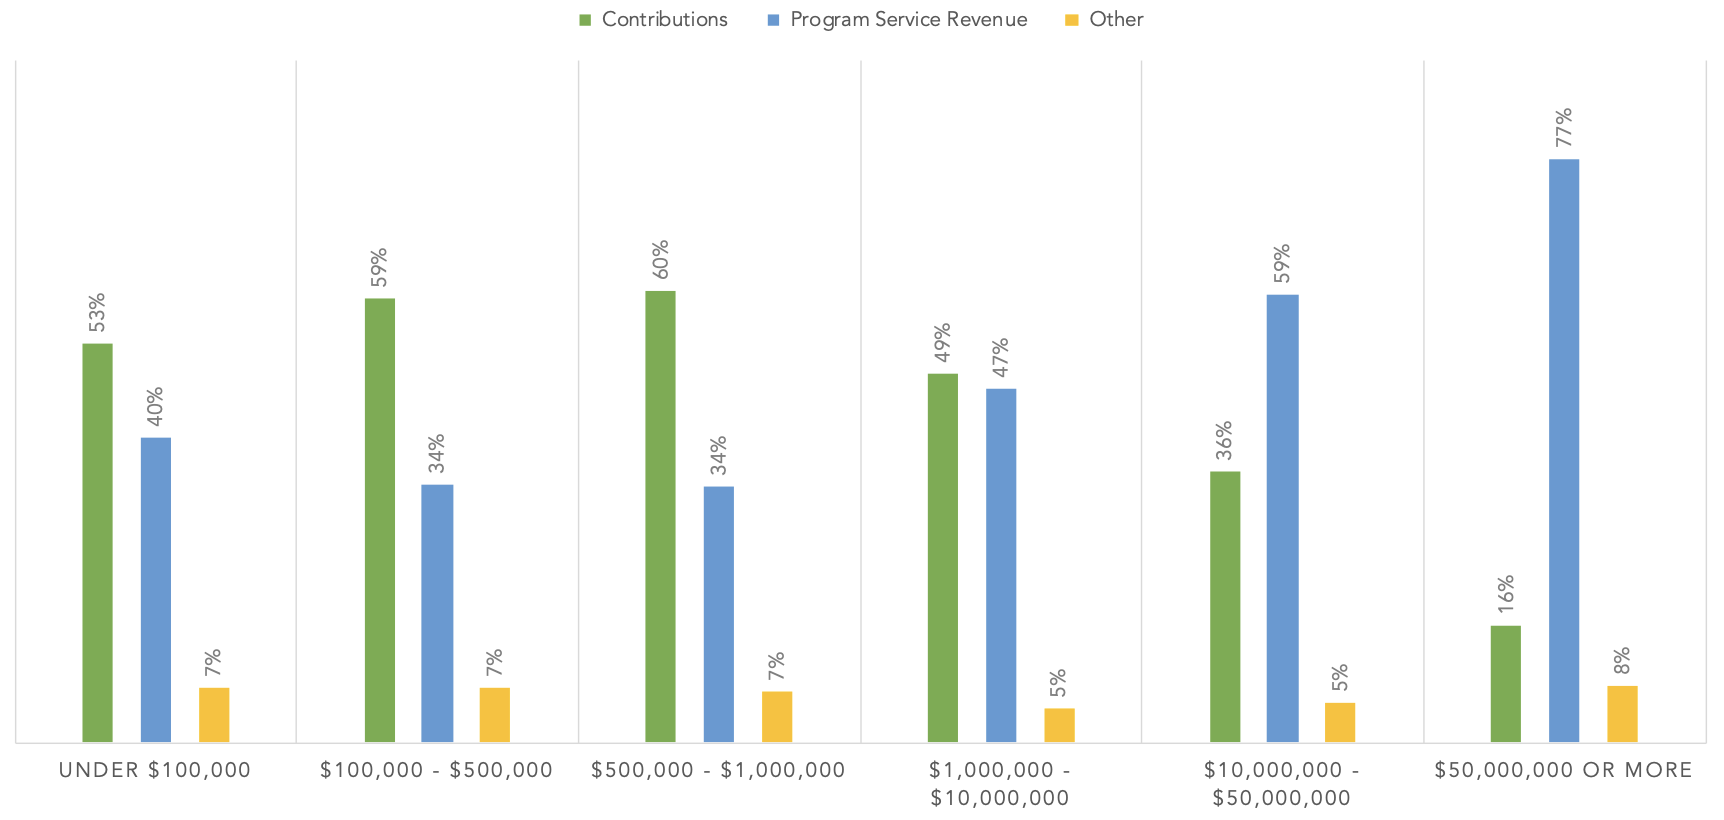 Bar graph of public charities revenues by revenue source and charity size. Revenue sources include contributions, program service revenue, and other.